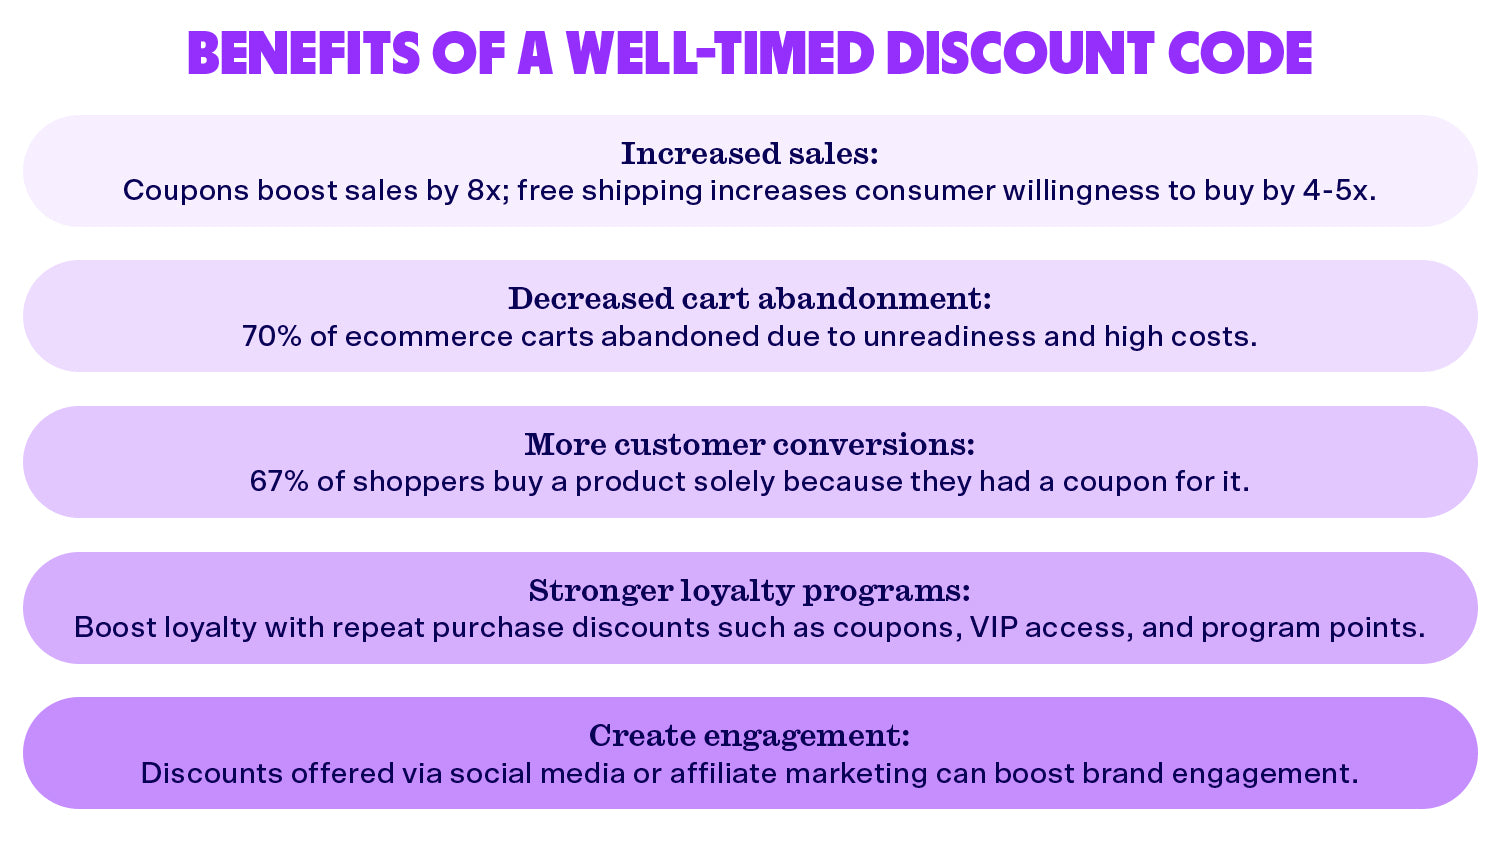 Benefits of a well-timed discount code includes increased sales, decreased cart abandonment, and stronger loyalty.